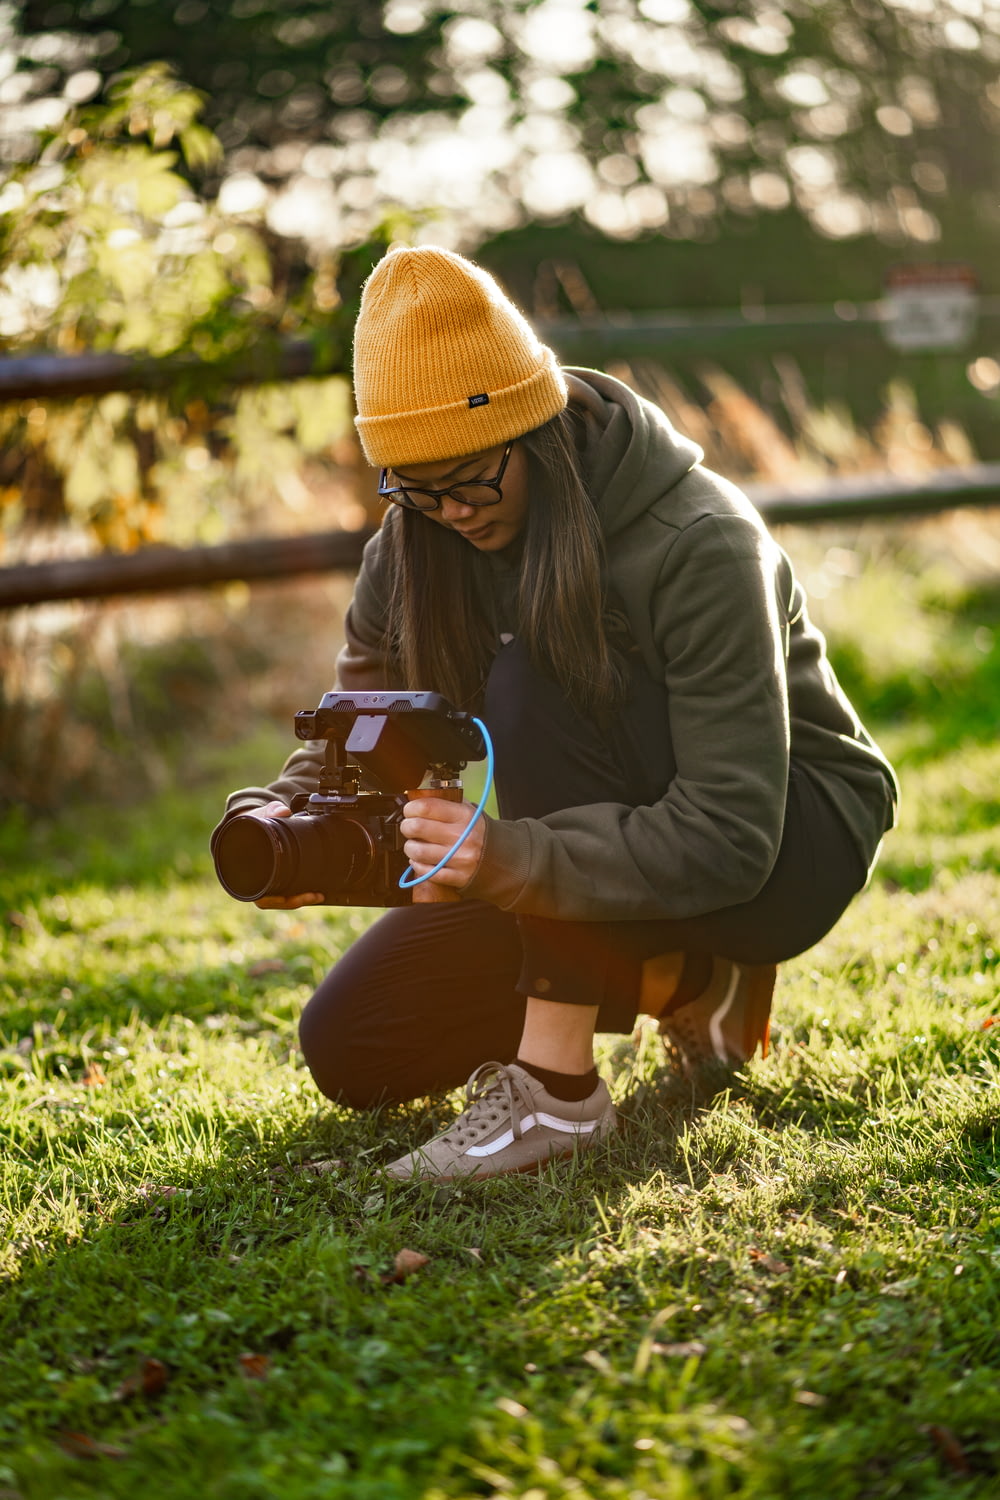 a woman kneeling down while holding a camera